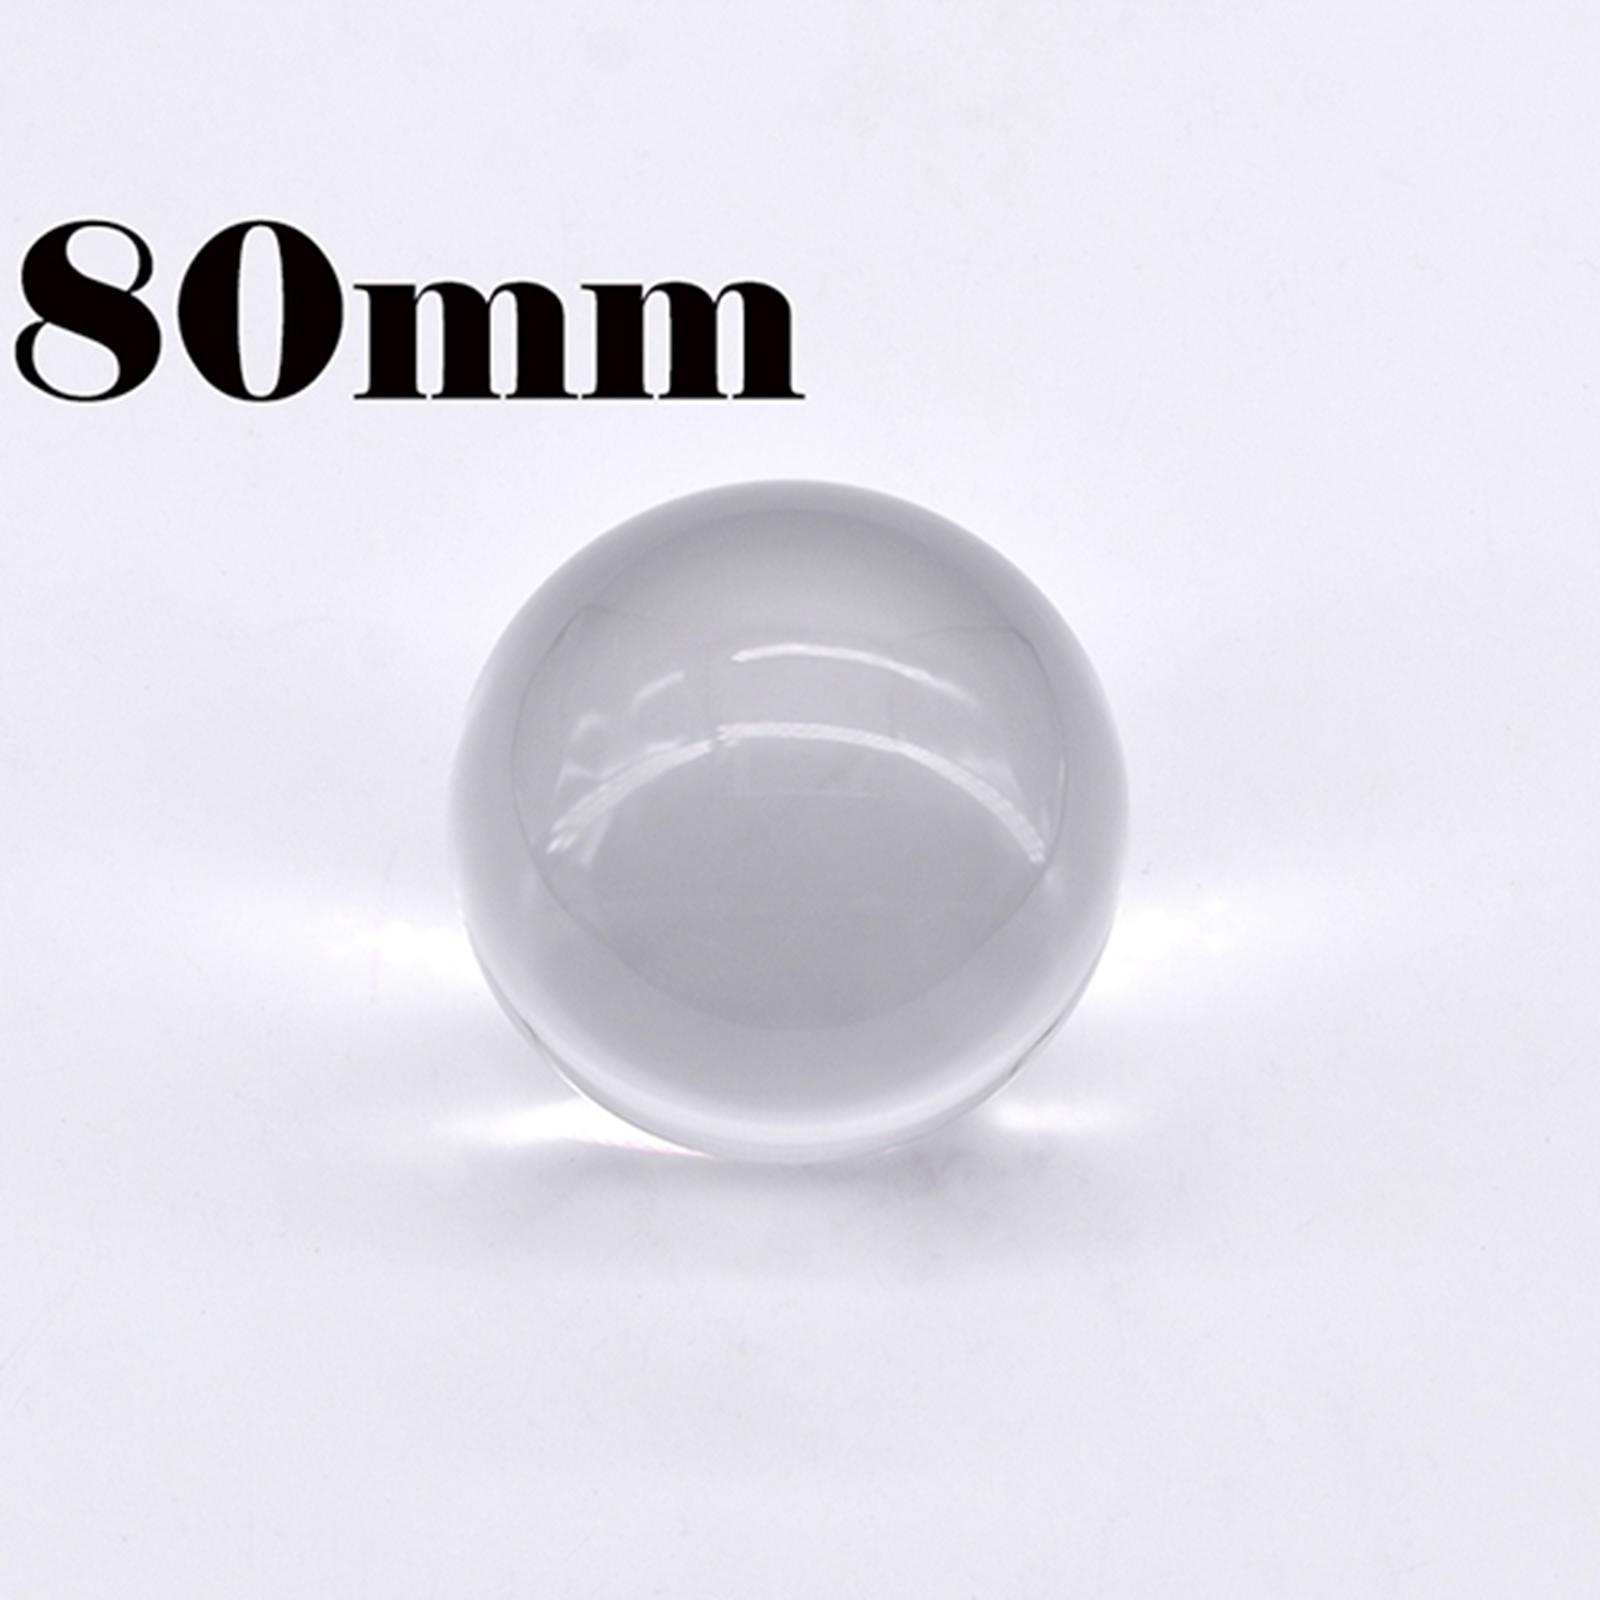 Camera Sphere Decoration Photography Fittings Orb Multifunctional Centerpiece Clear Round Crystal Ball Transparent Decorative Ball